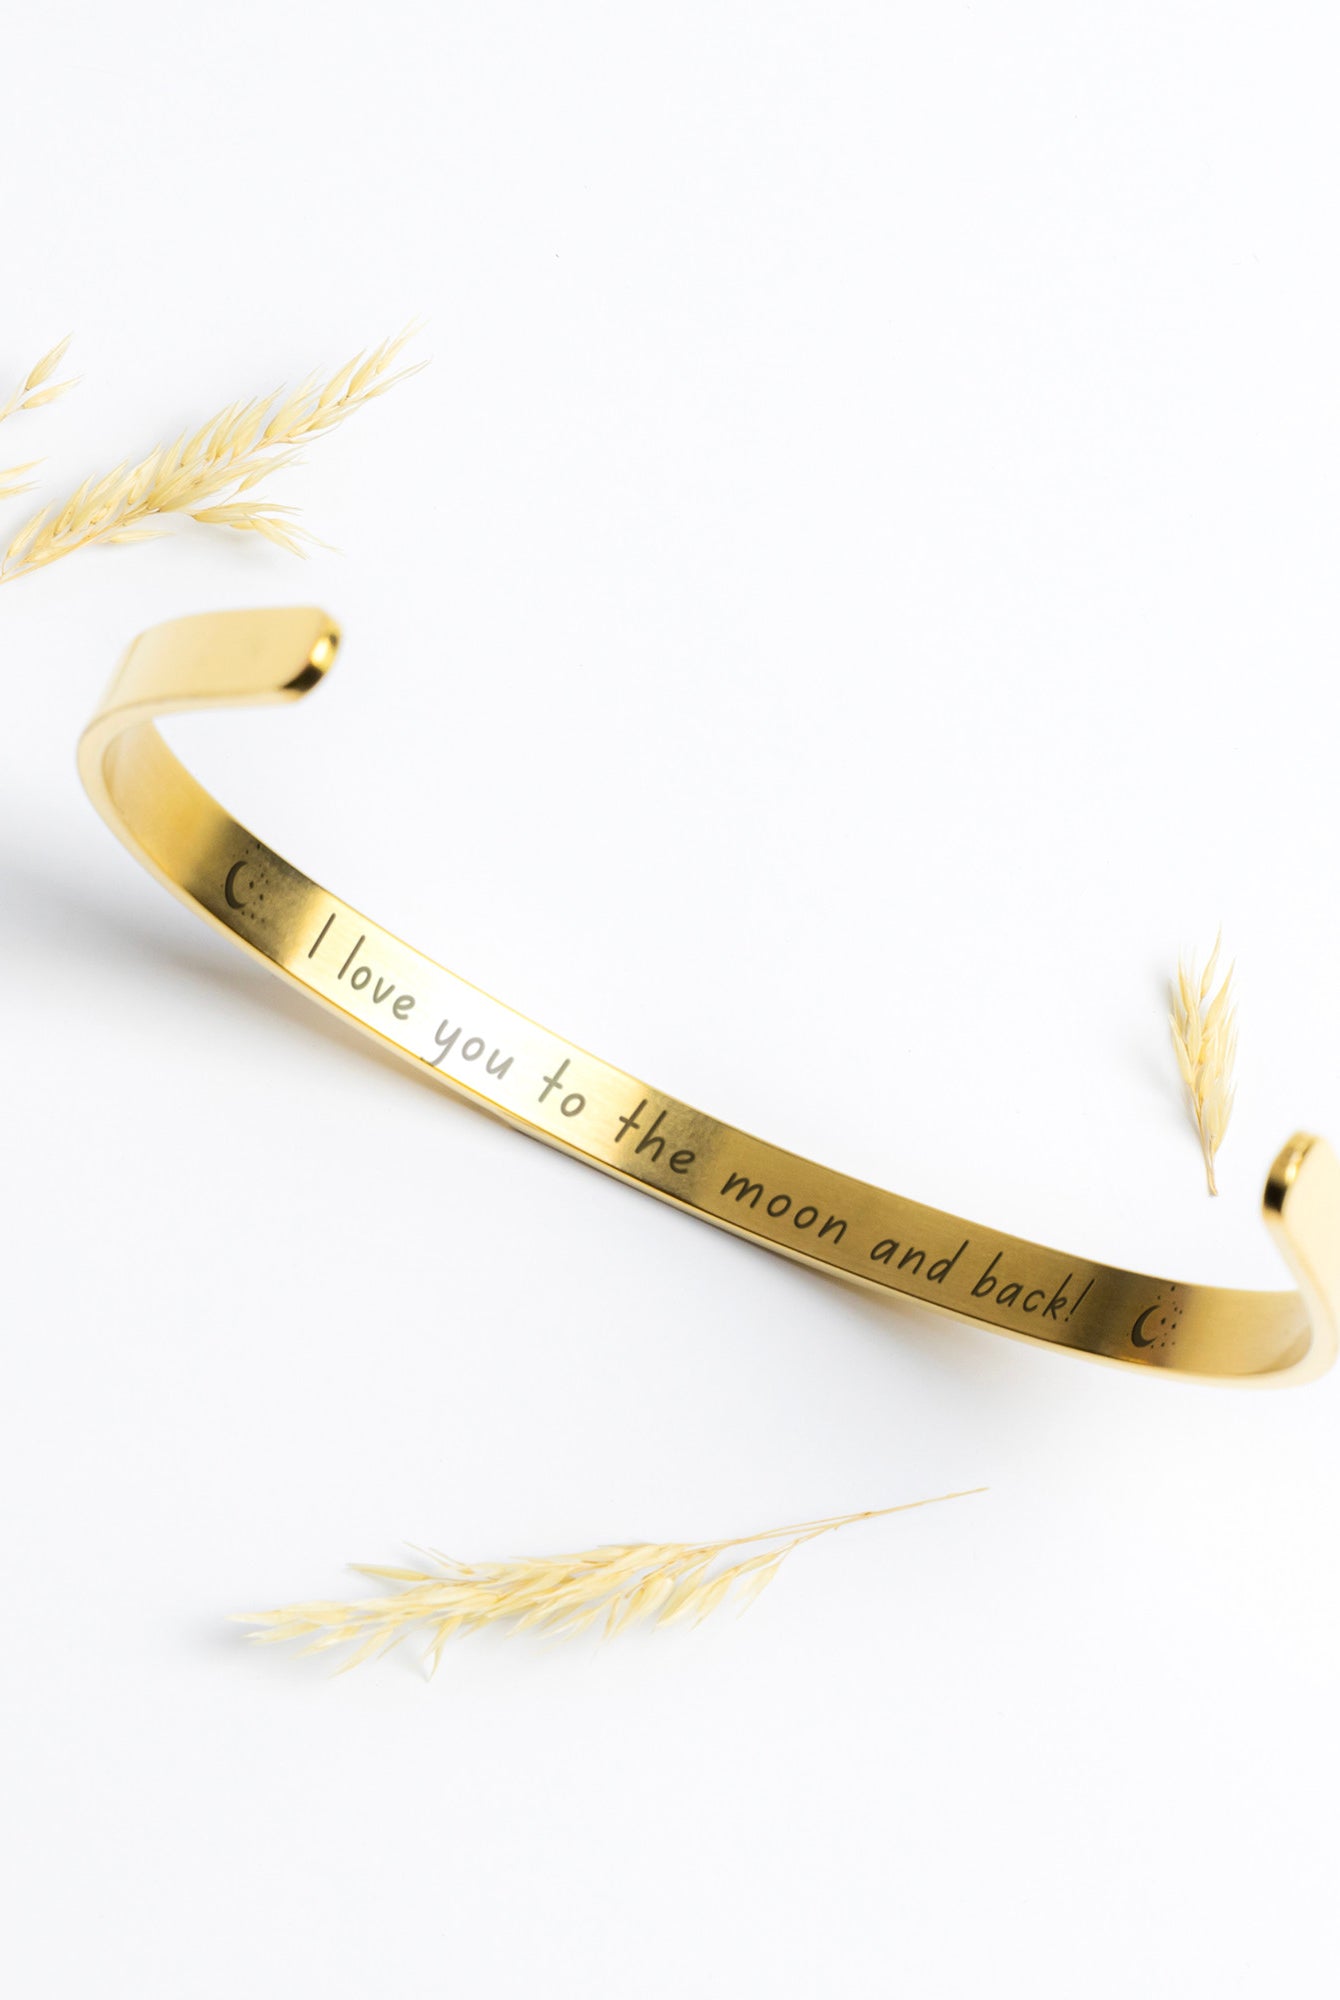 Gold Cuff Bracelet with the word "Angel" engraved in the front.  The inside reads, "I love you to the moon and back."